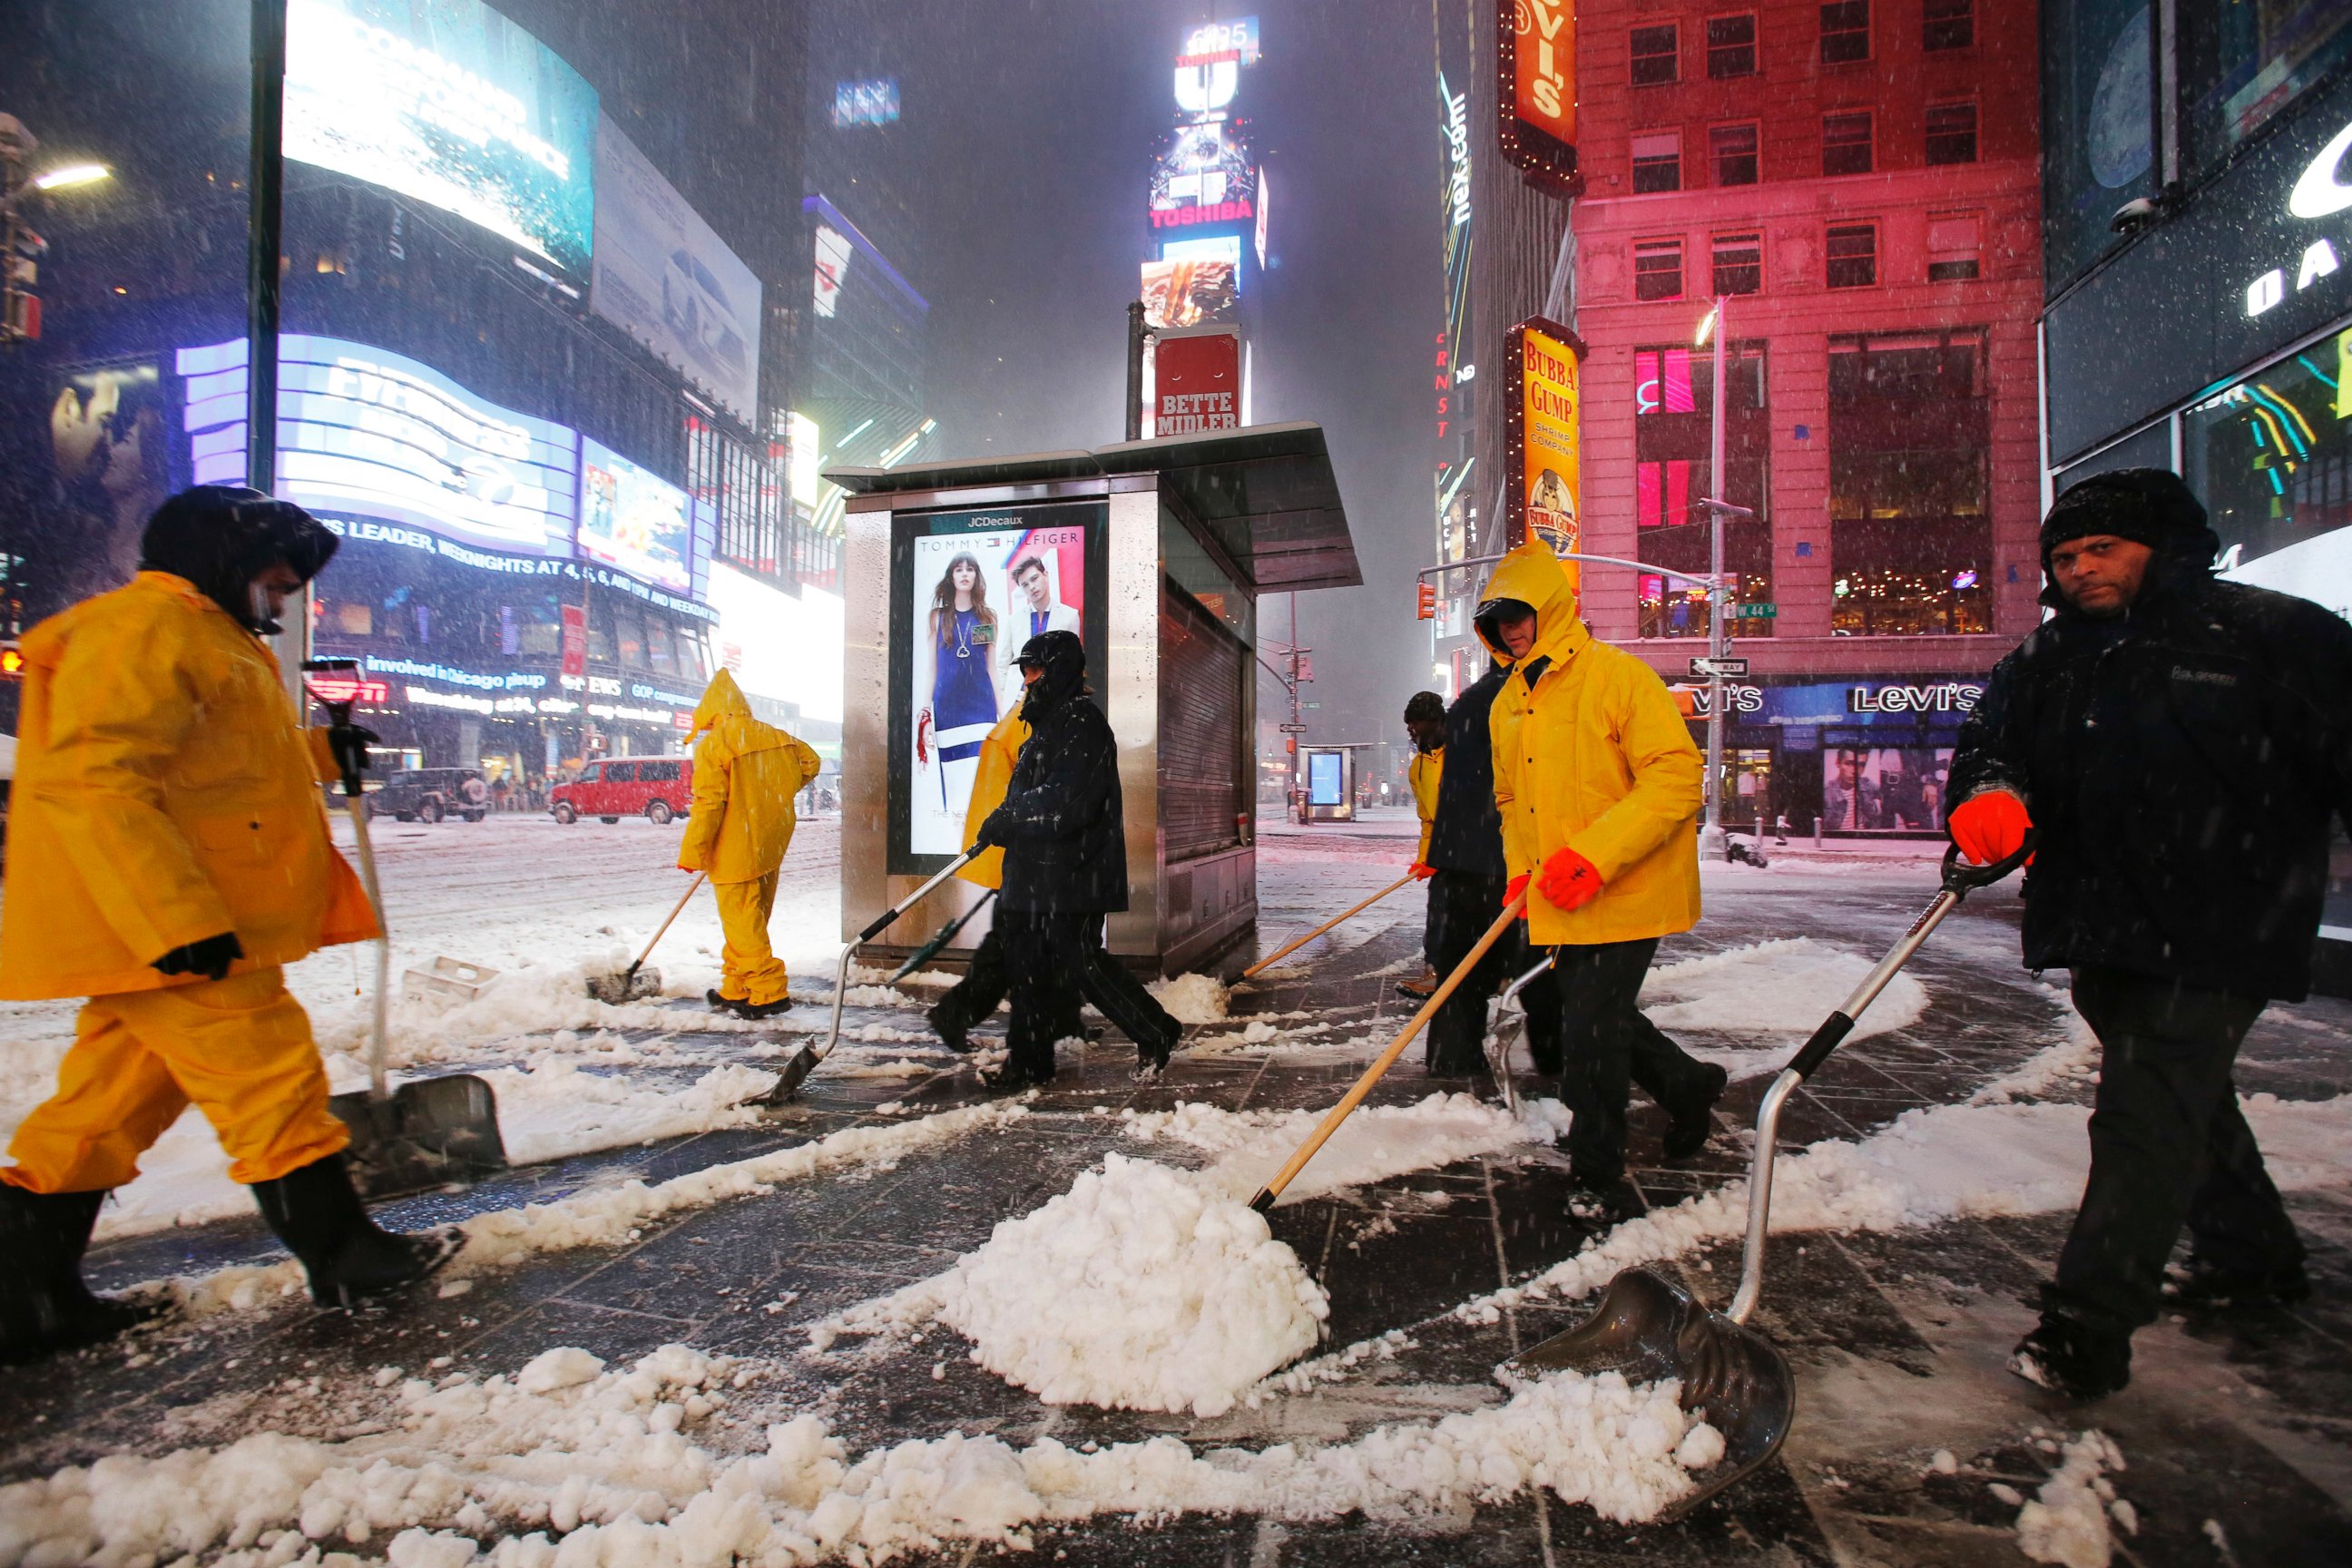 PHOTO: A crew works to remove snow as a snowstorm sweeps through Times Square, March 14, 2017, in New York.